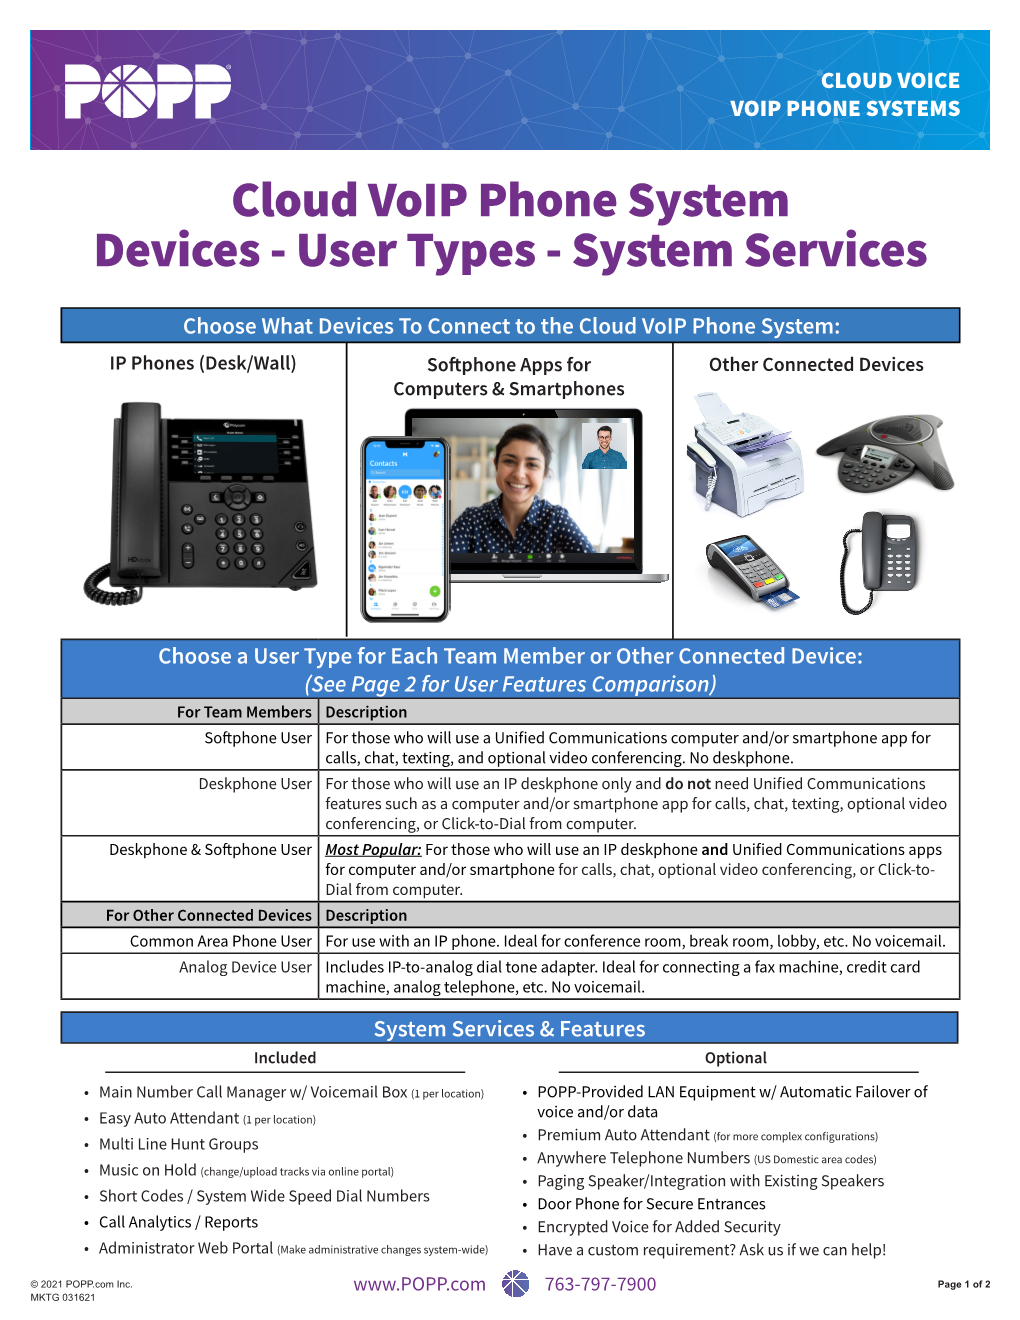 Cloud Voip Phone System Devices - User Types - System Services